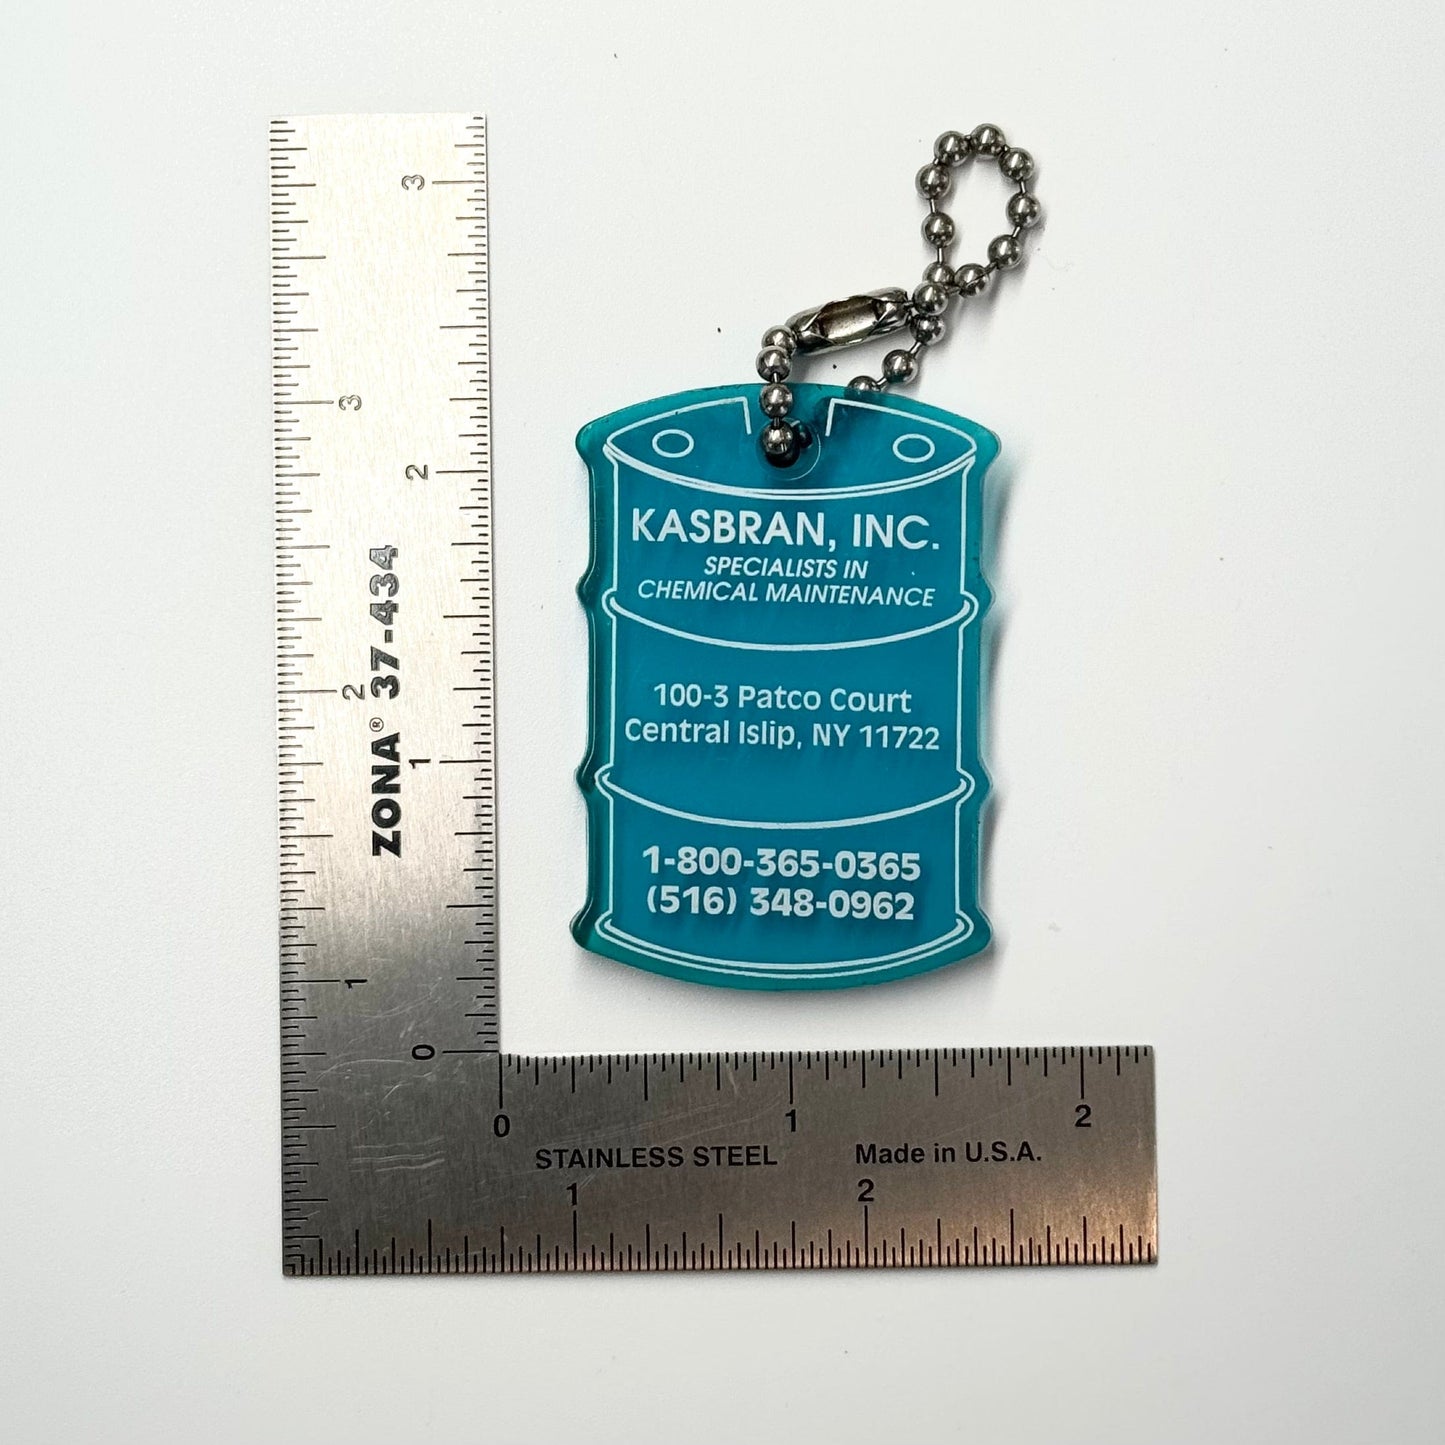 Central Islip, NY ‘Kasbran Chemical’ Keychain Key Ring Rubber Barrel Blue, Pre-Owned